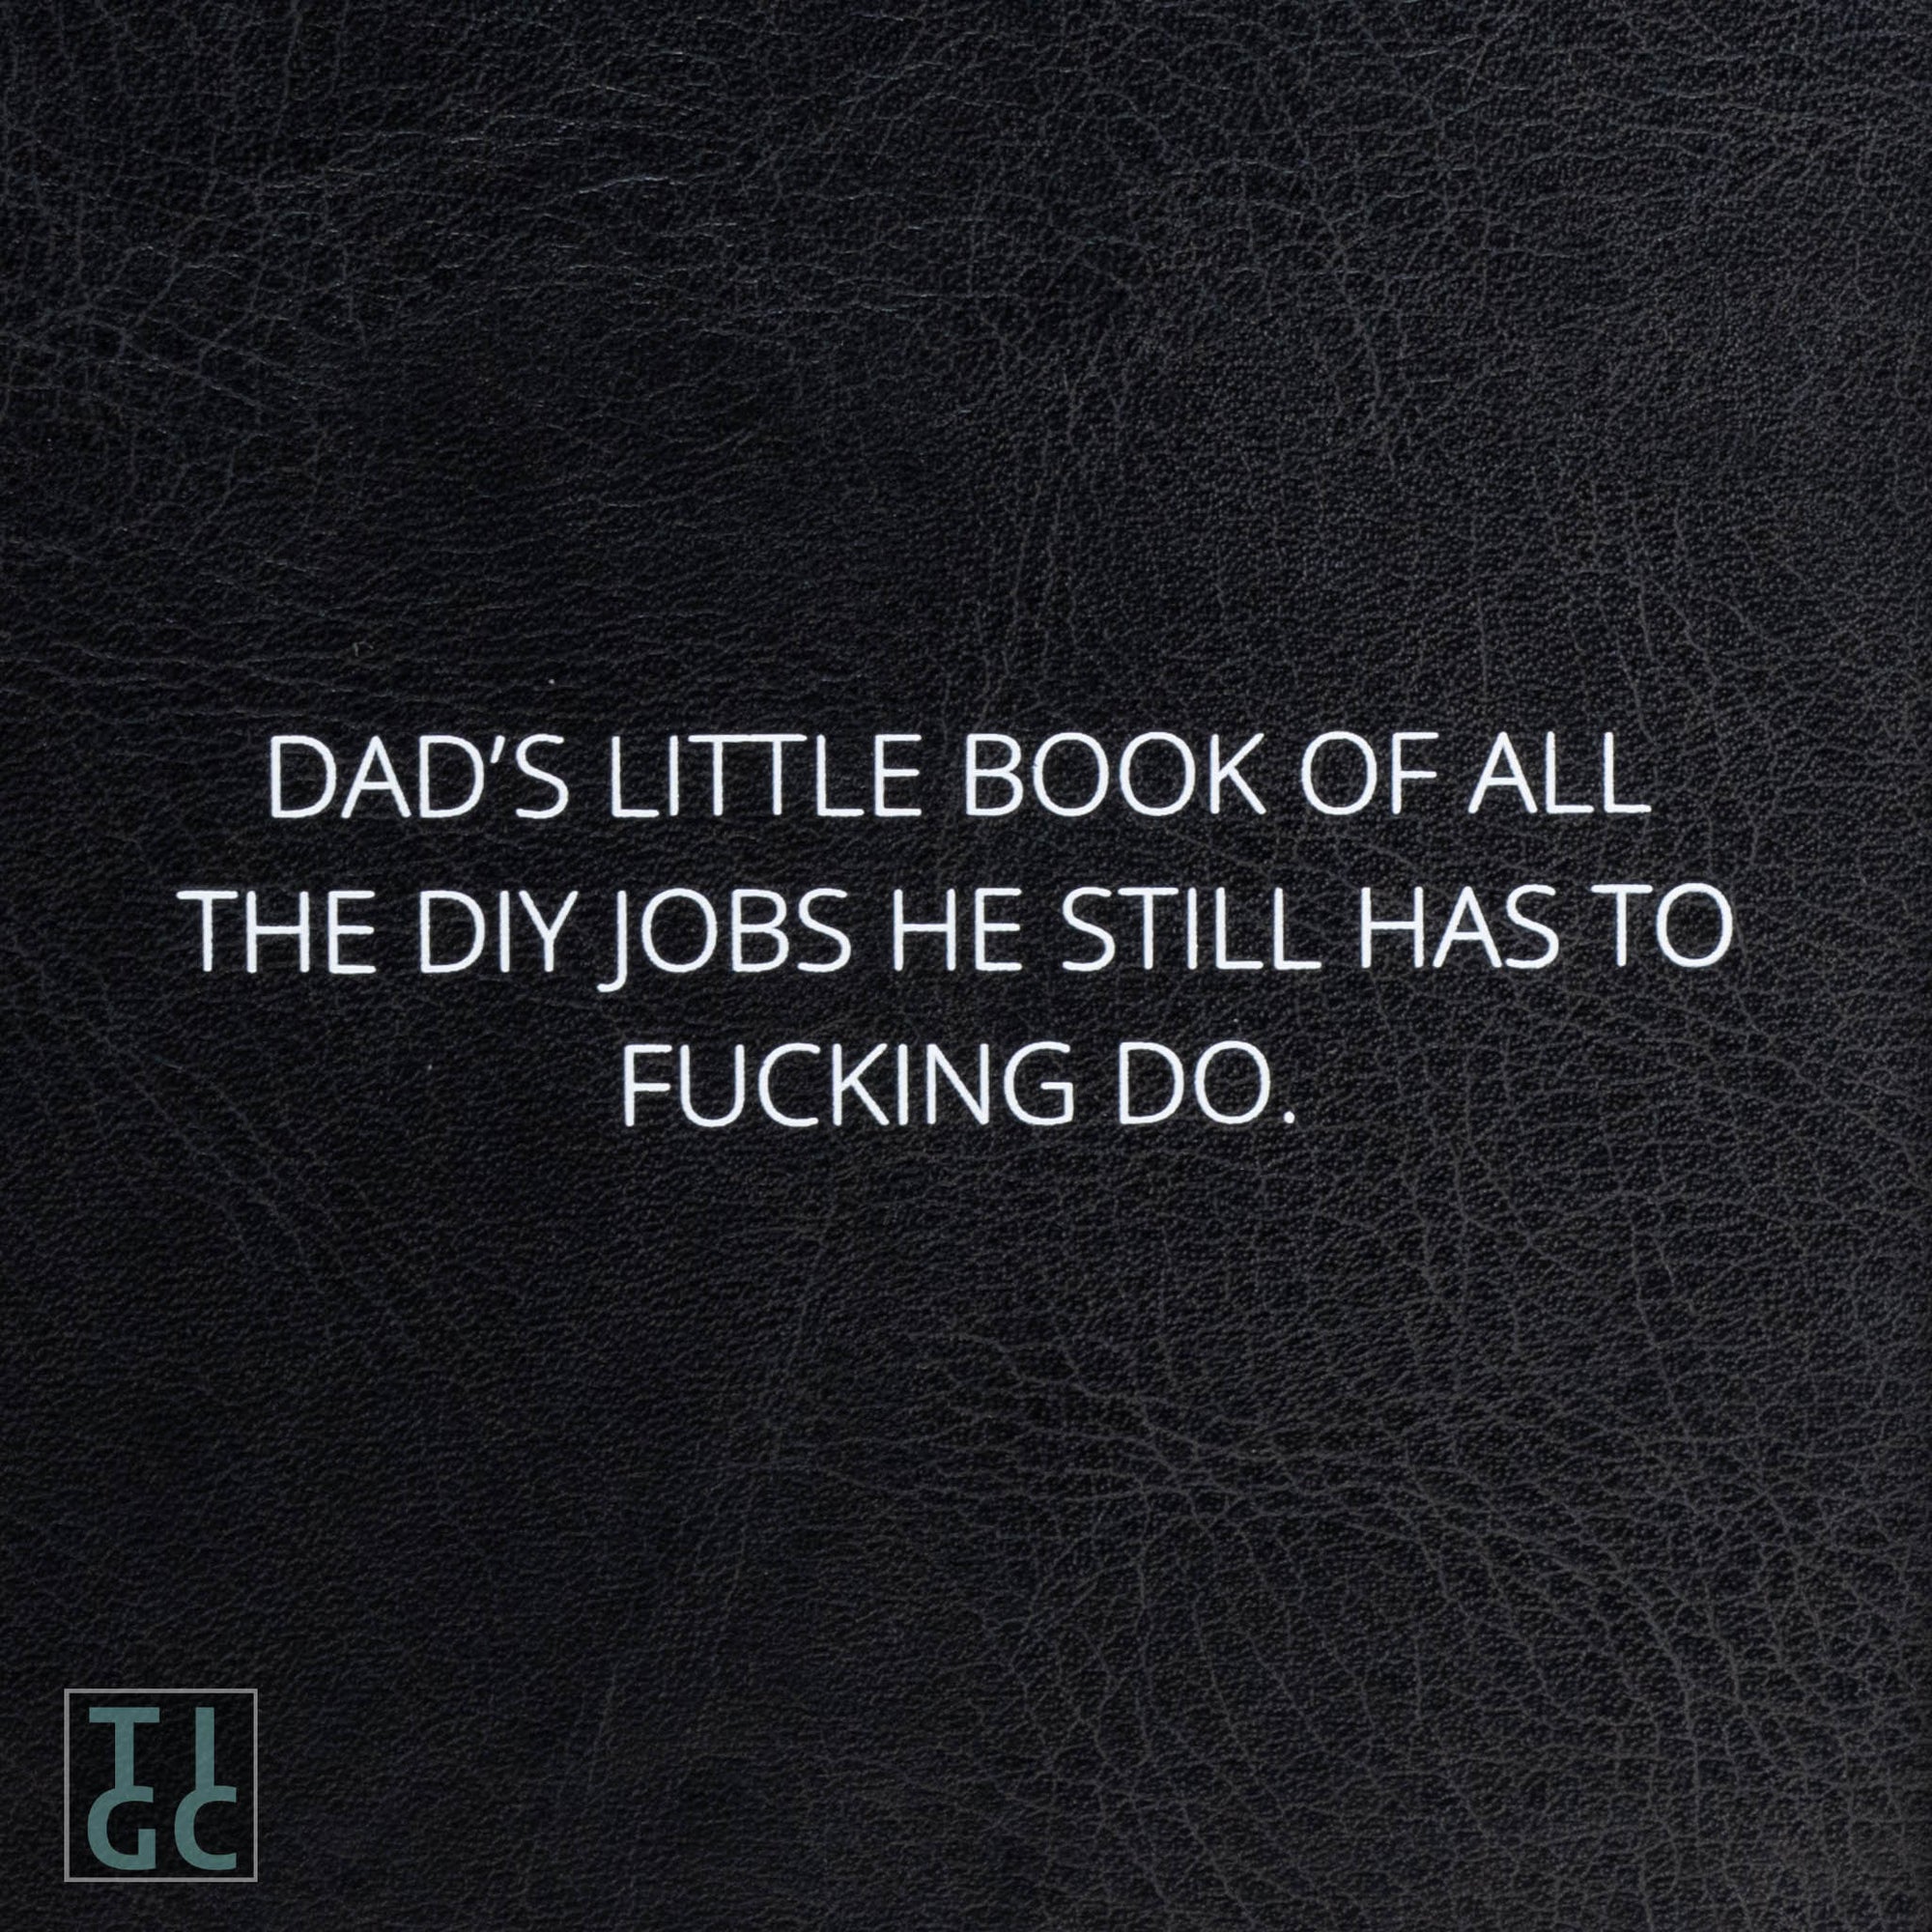 TIGC The Inappropriate Gift Co Dad's little book of all the DIY jobs he has to do